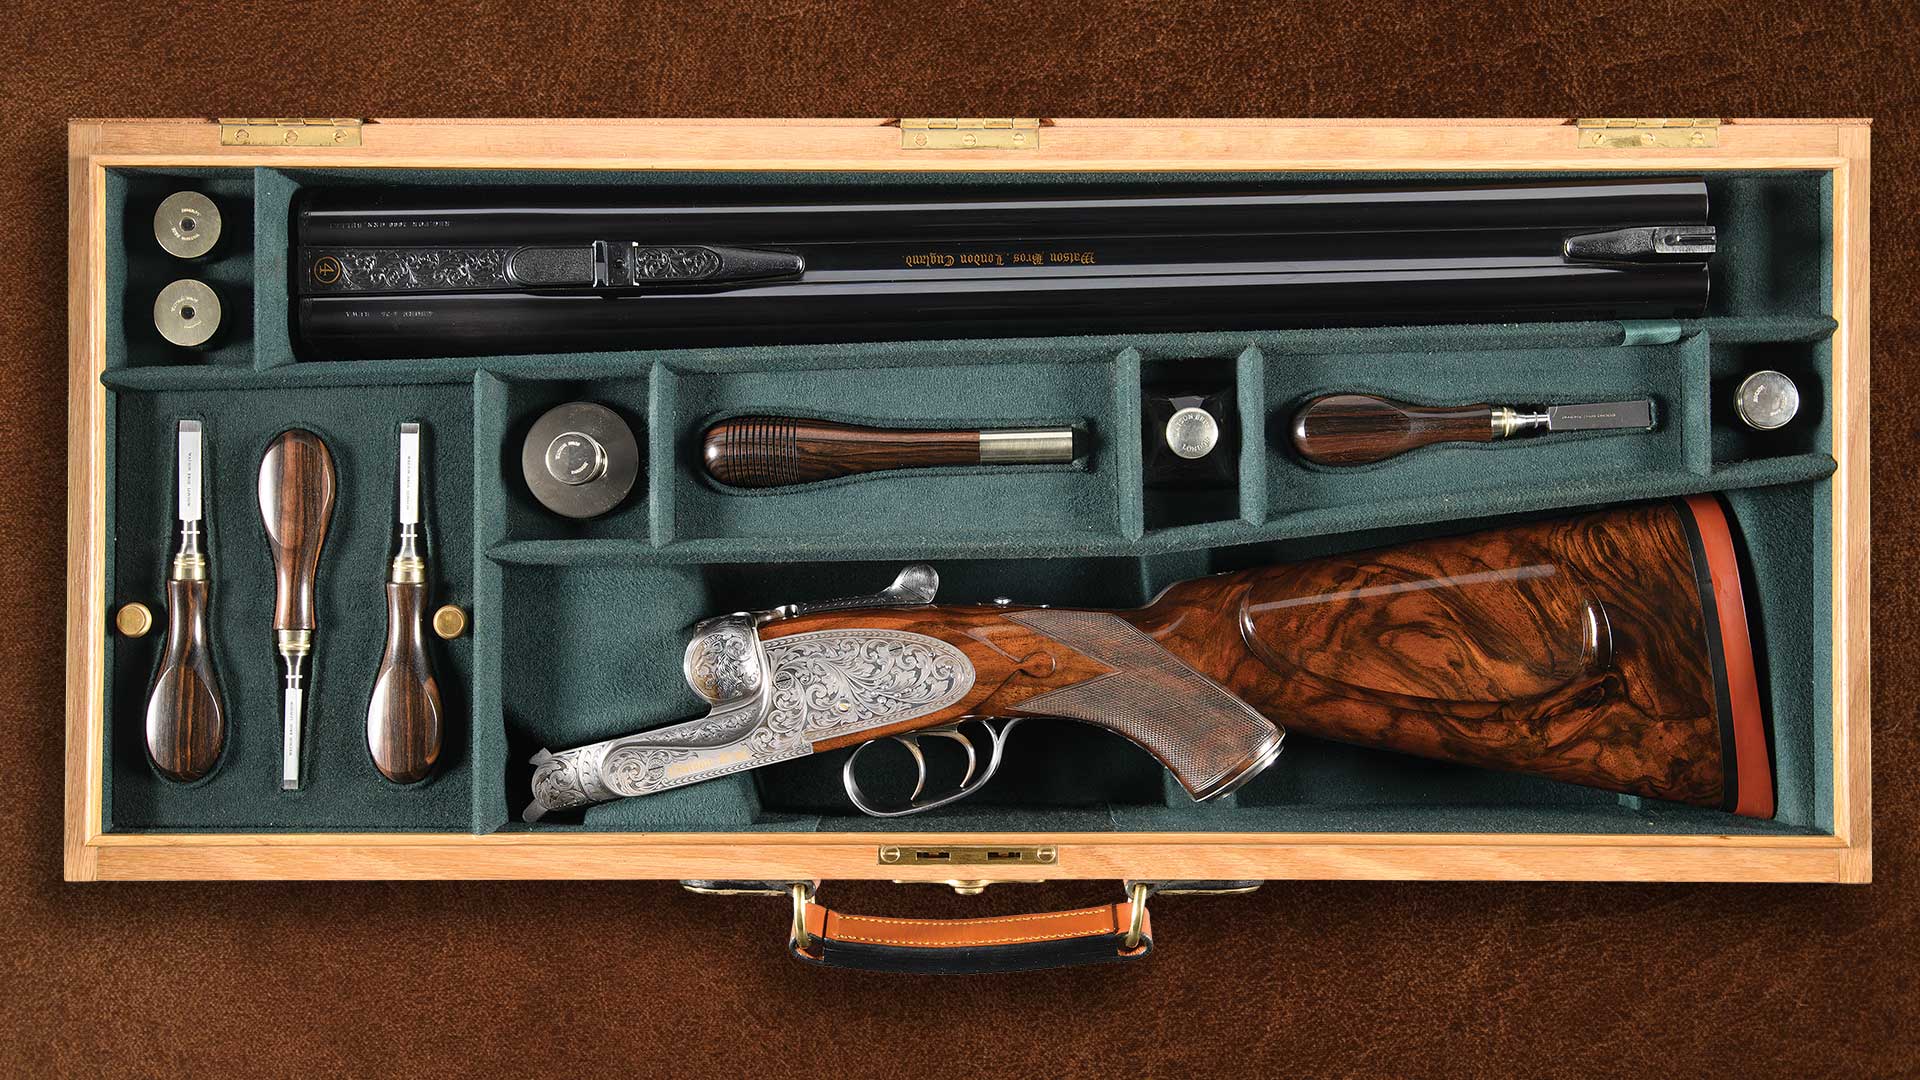 Peter-Spode-Signed-Gold-Inlaid-and-Dangerous-Game-Scene-Engraved-Watson-Brothers-4-Bore-Sidelock-Ejector-Double-Rifle-with-Case